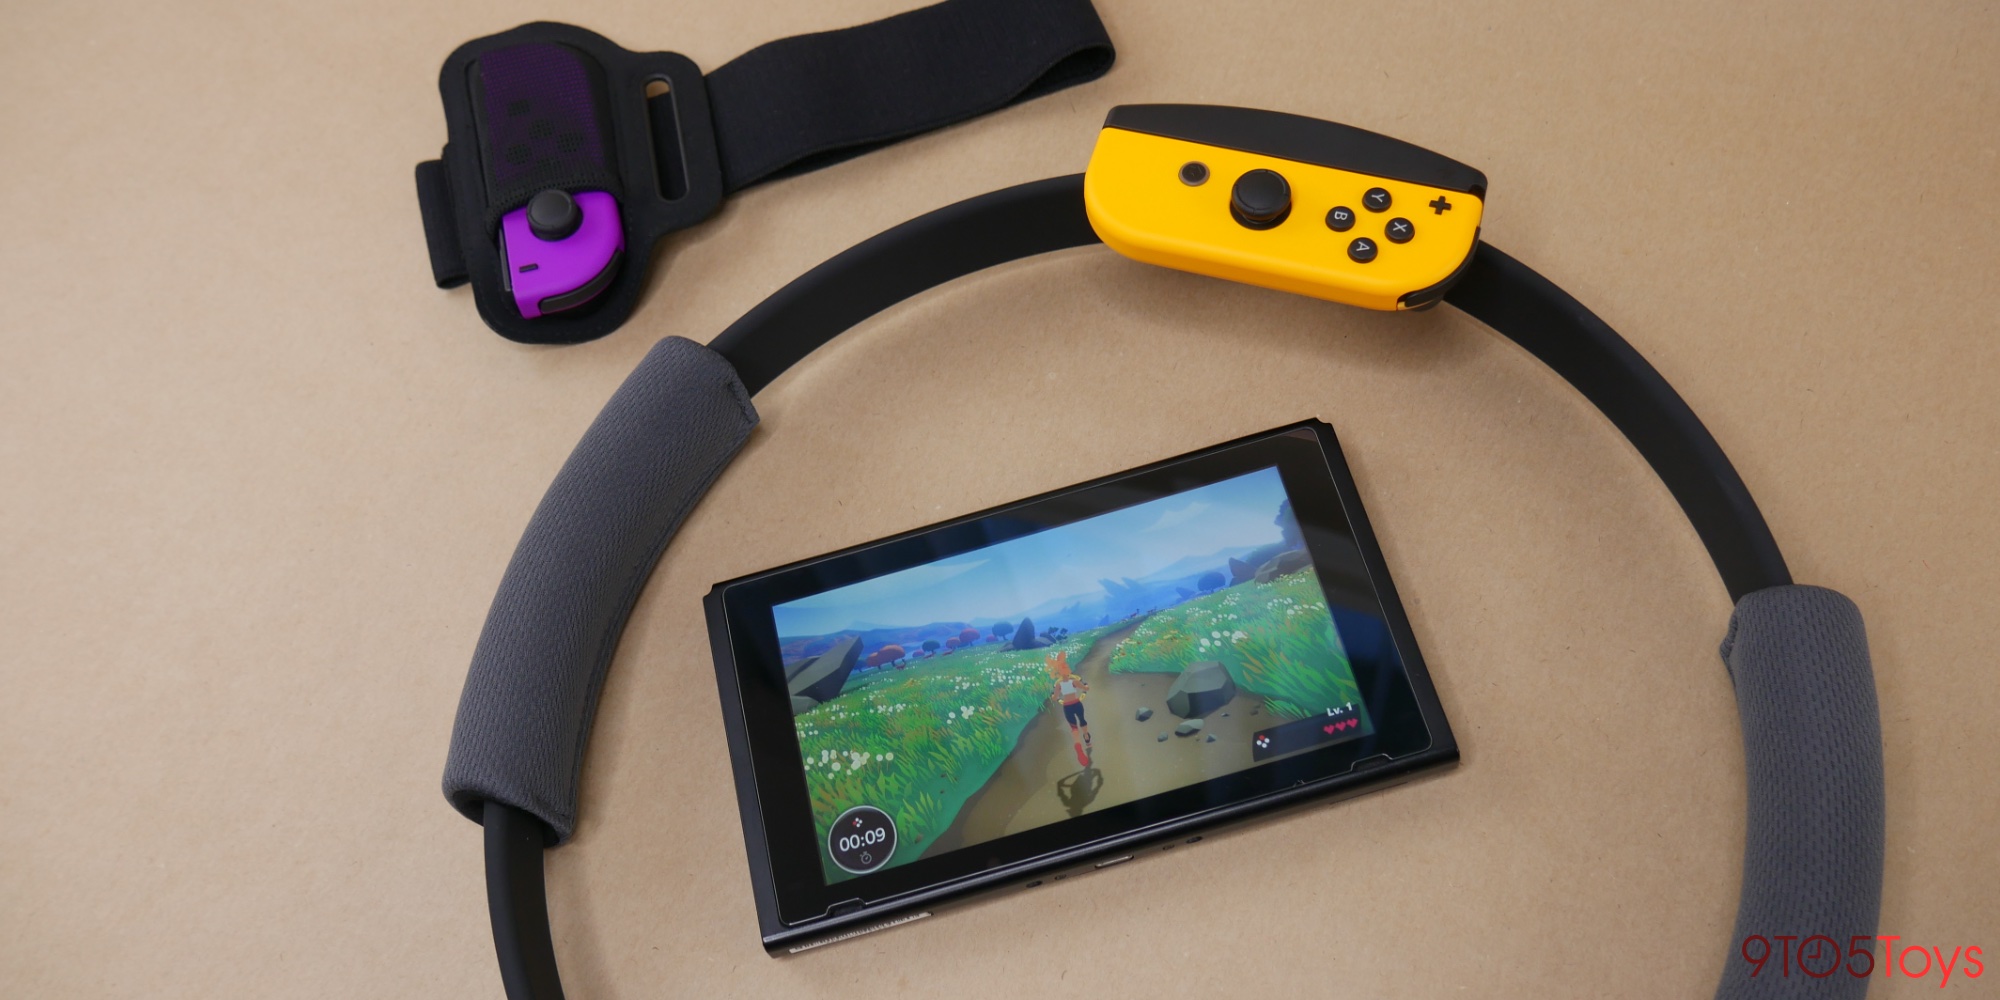 Ring Fit Adventure Review: A closer look at Nintendo's latest - 9to5Toys